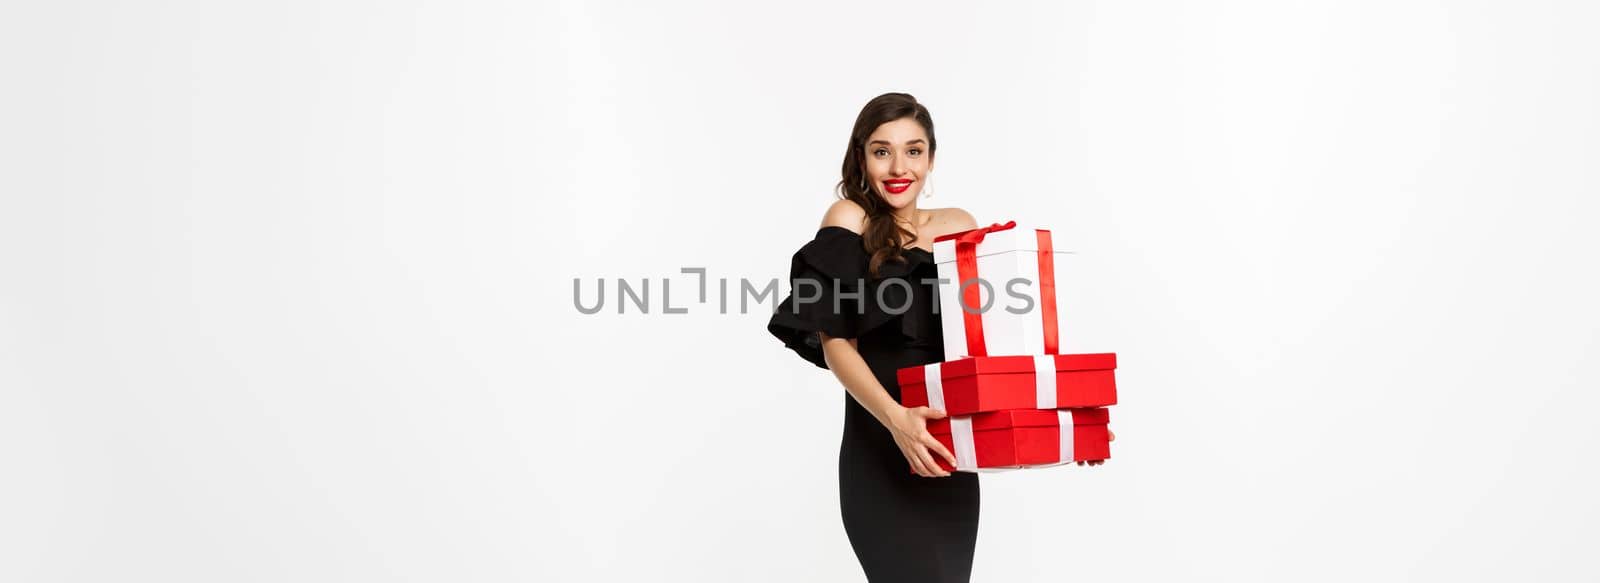 Merry christmas and new year holidays concept. Excited young woman bring gifts, holding xmas presents and smiling at camera, wearing black dress, white background.